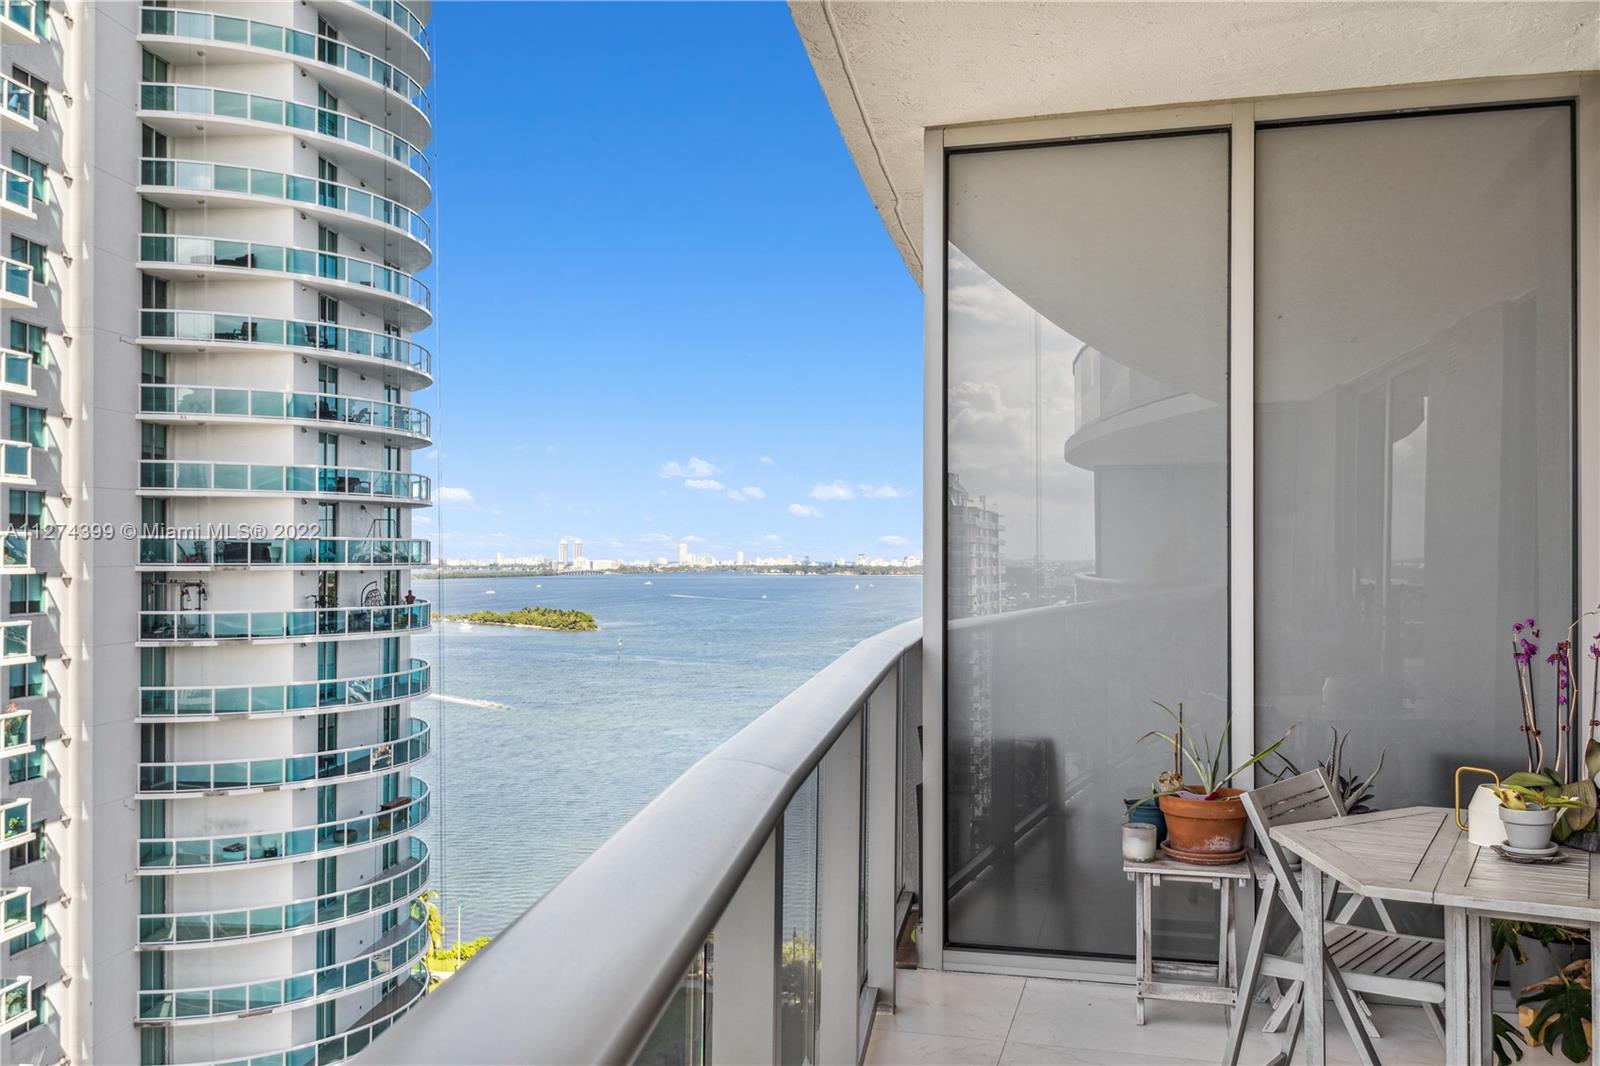 Gorgeous unit at Aria on the Bay, One bedroom, One and a half bathrooms, ample balcony with bay and 